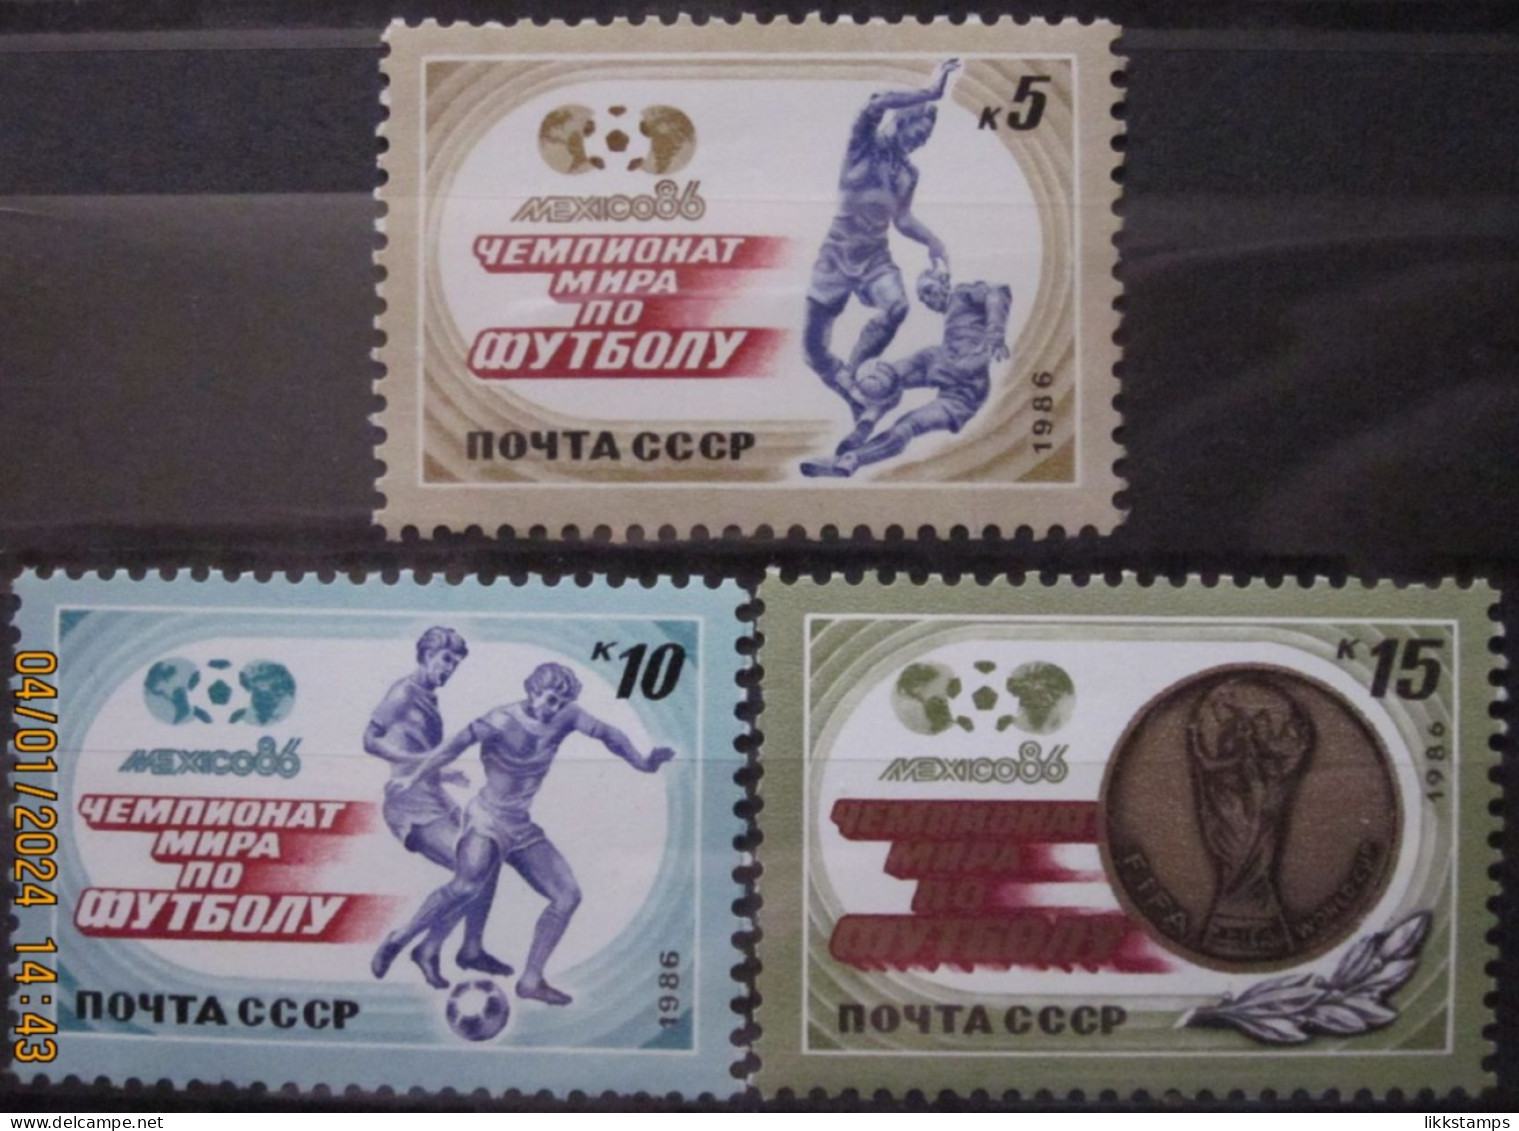 RUSSIA ~ 1986 ~ S.G. NUMBERS 5660 - 5662, ~ FOOTBALL. ~ MNH #03643 - Unused Stamps